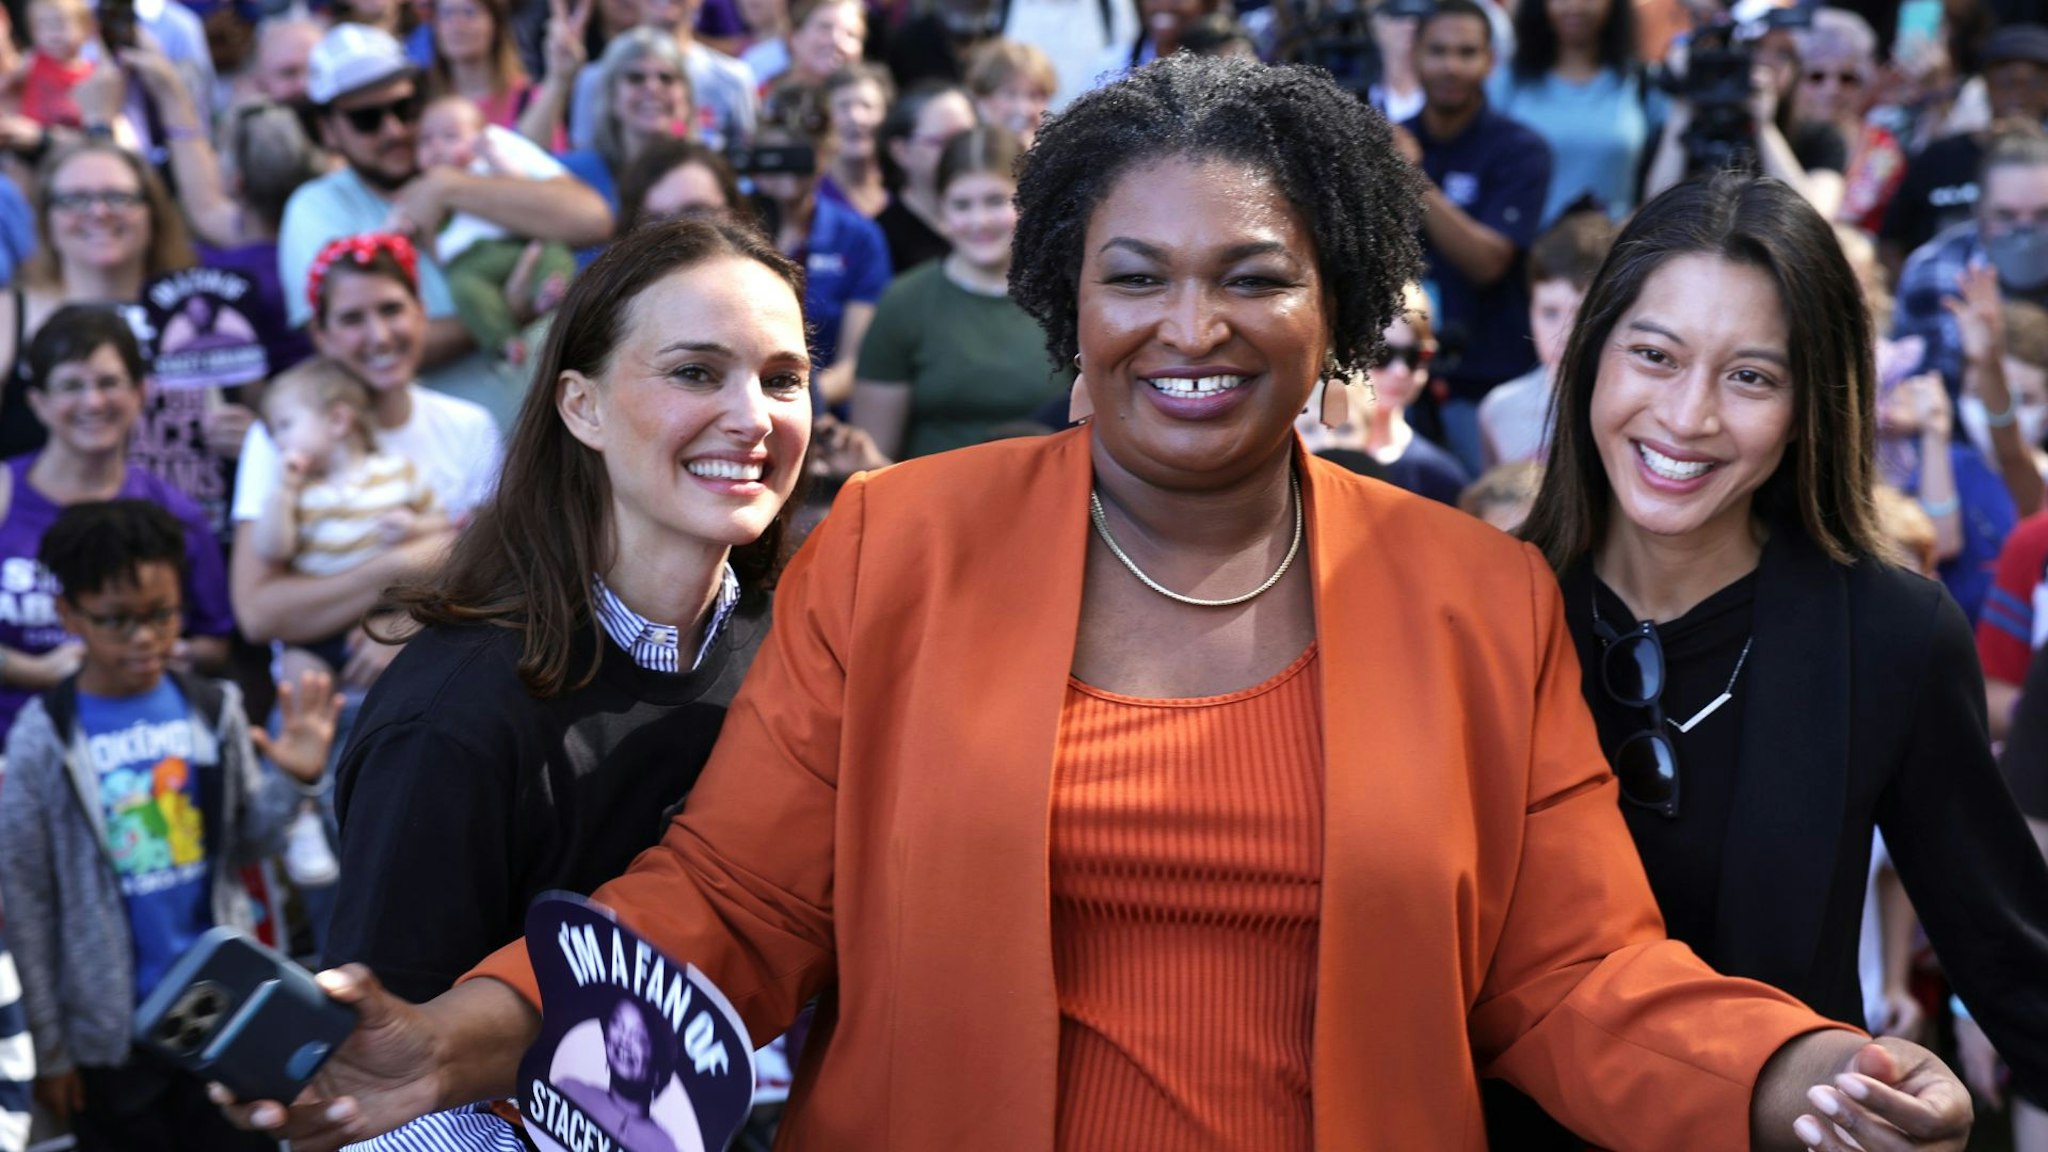 SAVANNAH, GEORGIA - NOVEMBER 05: Democratic Georgia gubernatorial candidate Stacey Abrams (C) poses for photos with supporters, actress Natalie Portman (L) and Democratic candidate for Georgia Secretary of State, and Georgia State House Rep. Bee Nguyen (D-89th District) (R) during a stop of her statewide campaign bus tour on November 5, 2022 in Savannah, Georgia. Abrams continued to campaign to unseat her Republican rival Gov. Brian Kemp (R-GA) in the upcoming midterm election.